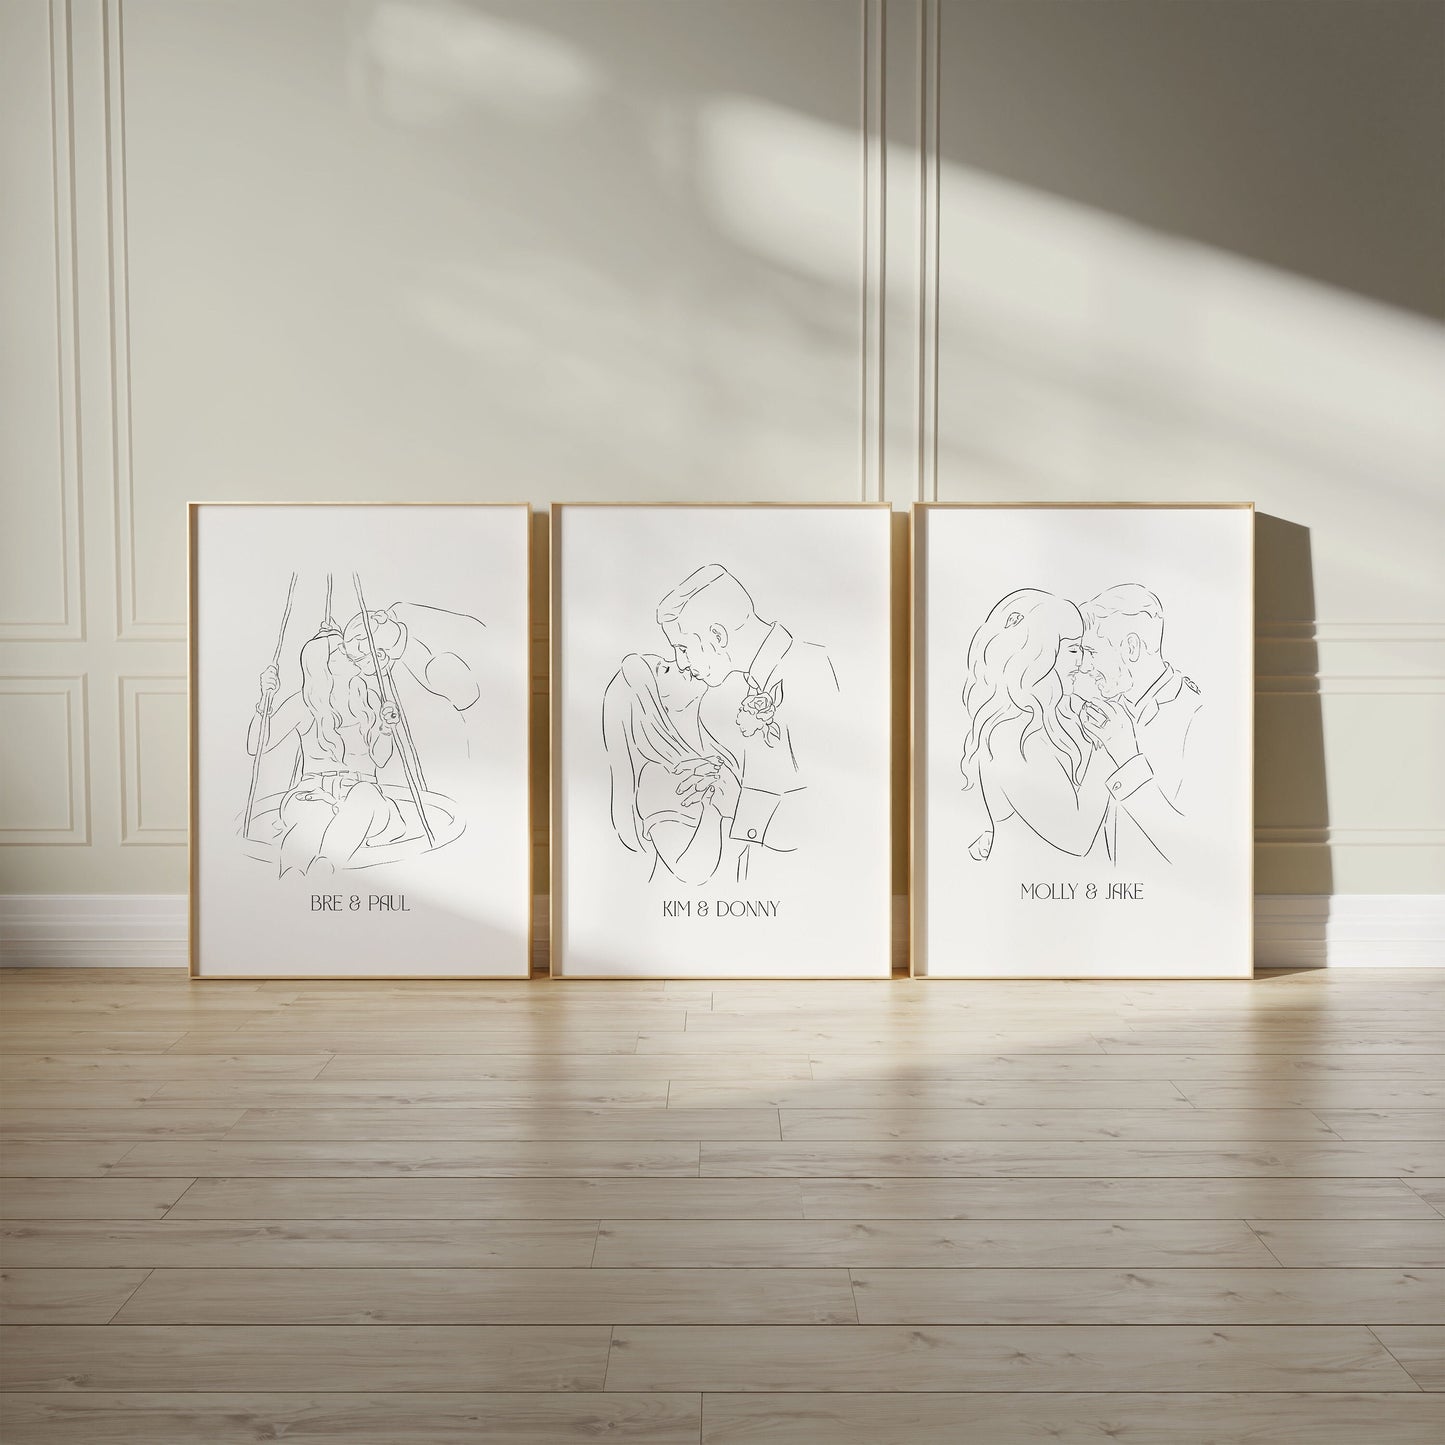 Portrait from Photo - Line Art Minimalist Family Portrait - Gift for Couples, Wedding Gift, Engagement Gift, Christmas Gift, Romantic Gift